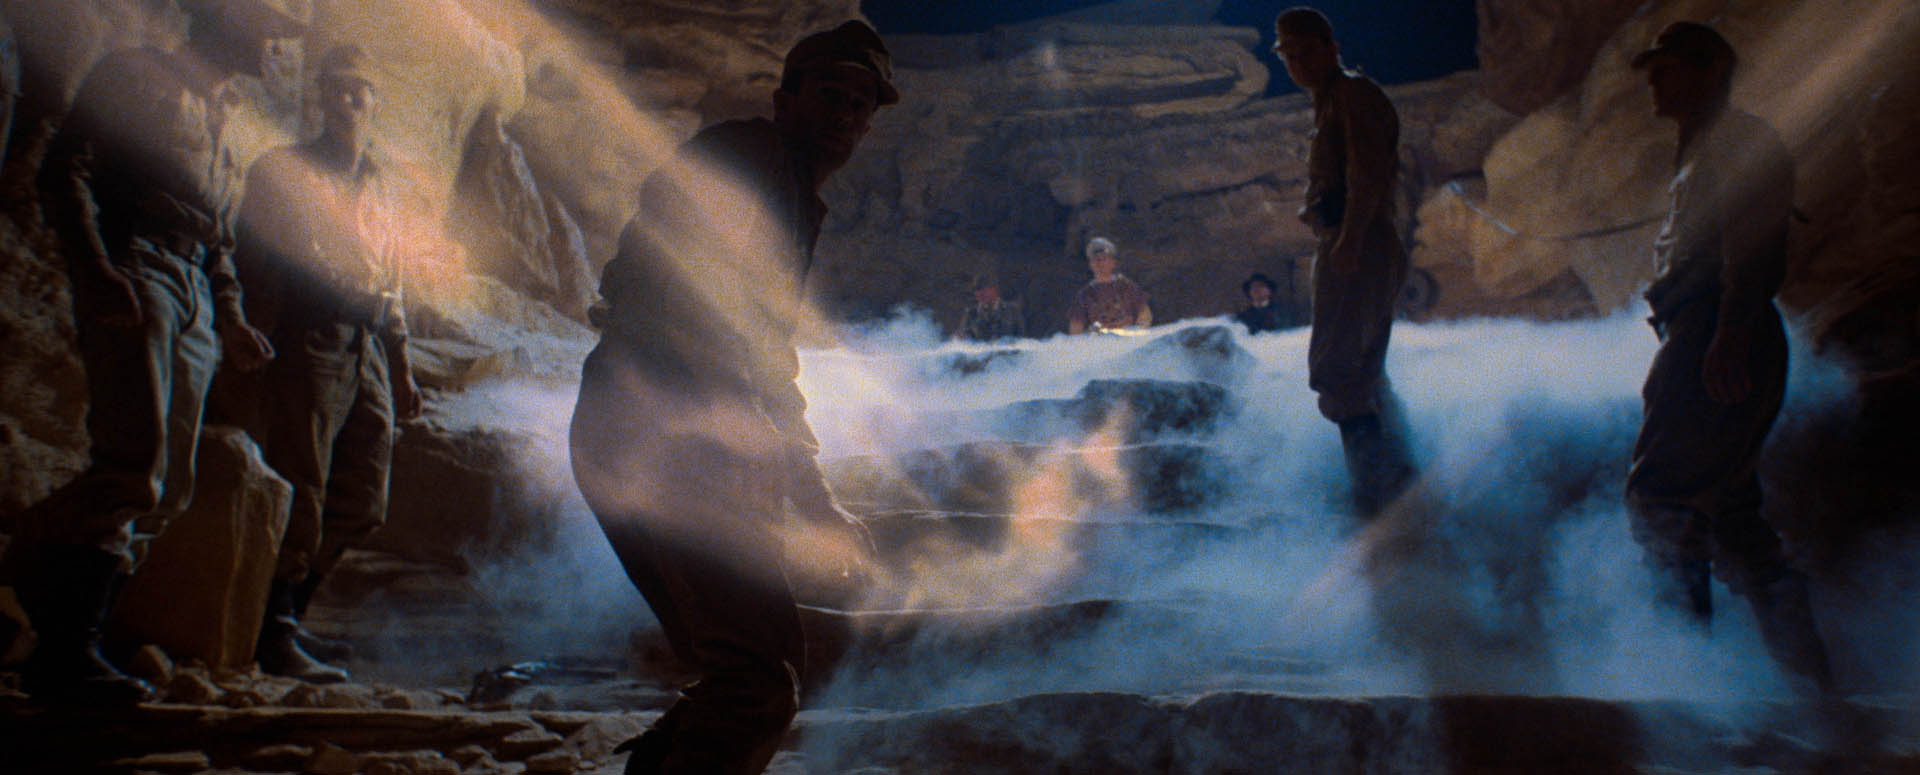 The Ark is opened in Indiana Jones and the Raiders of the Lost Ark